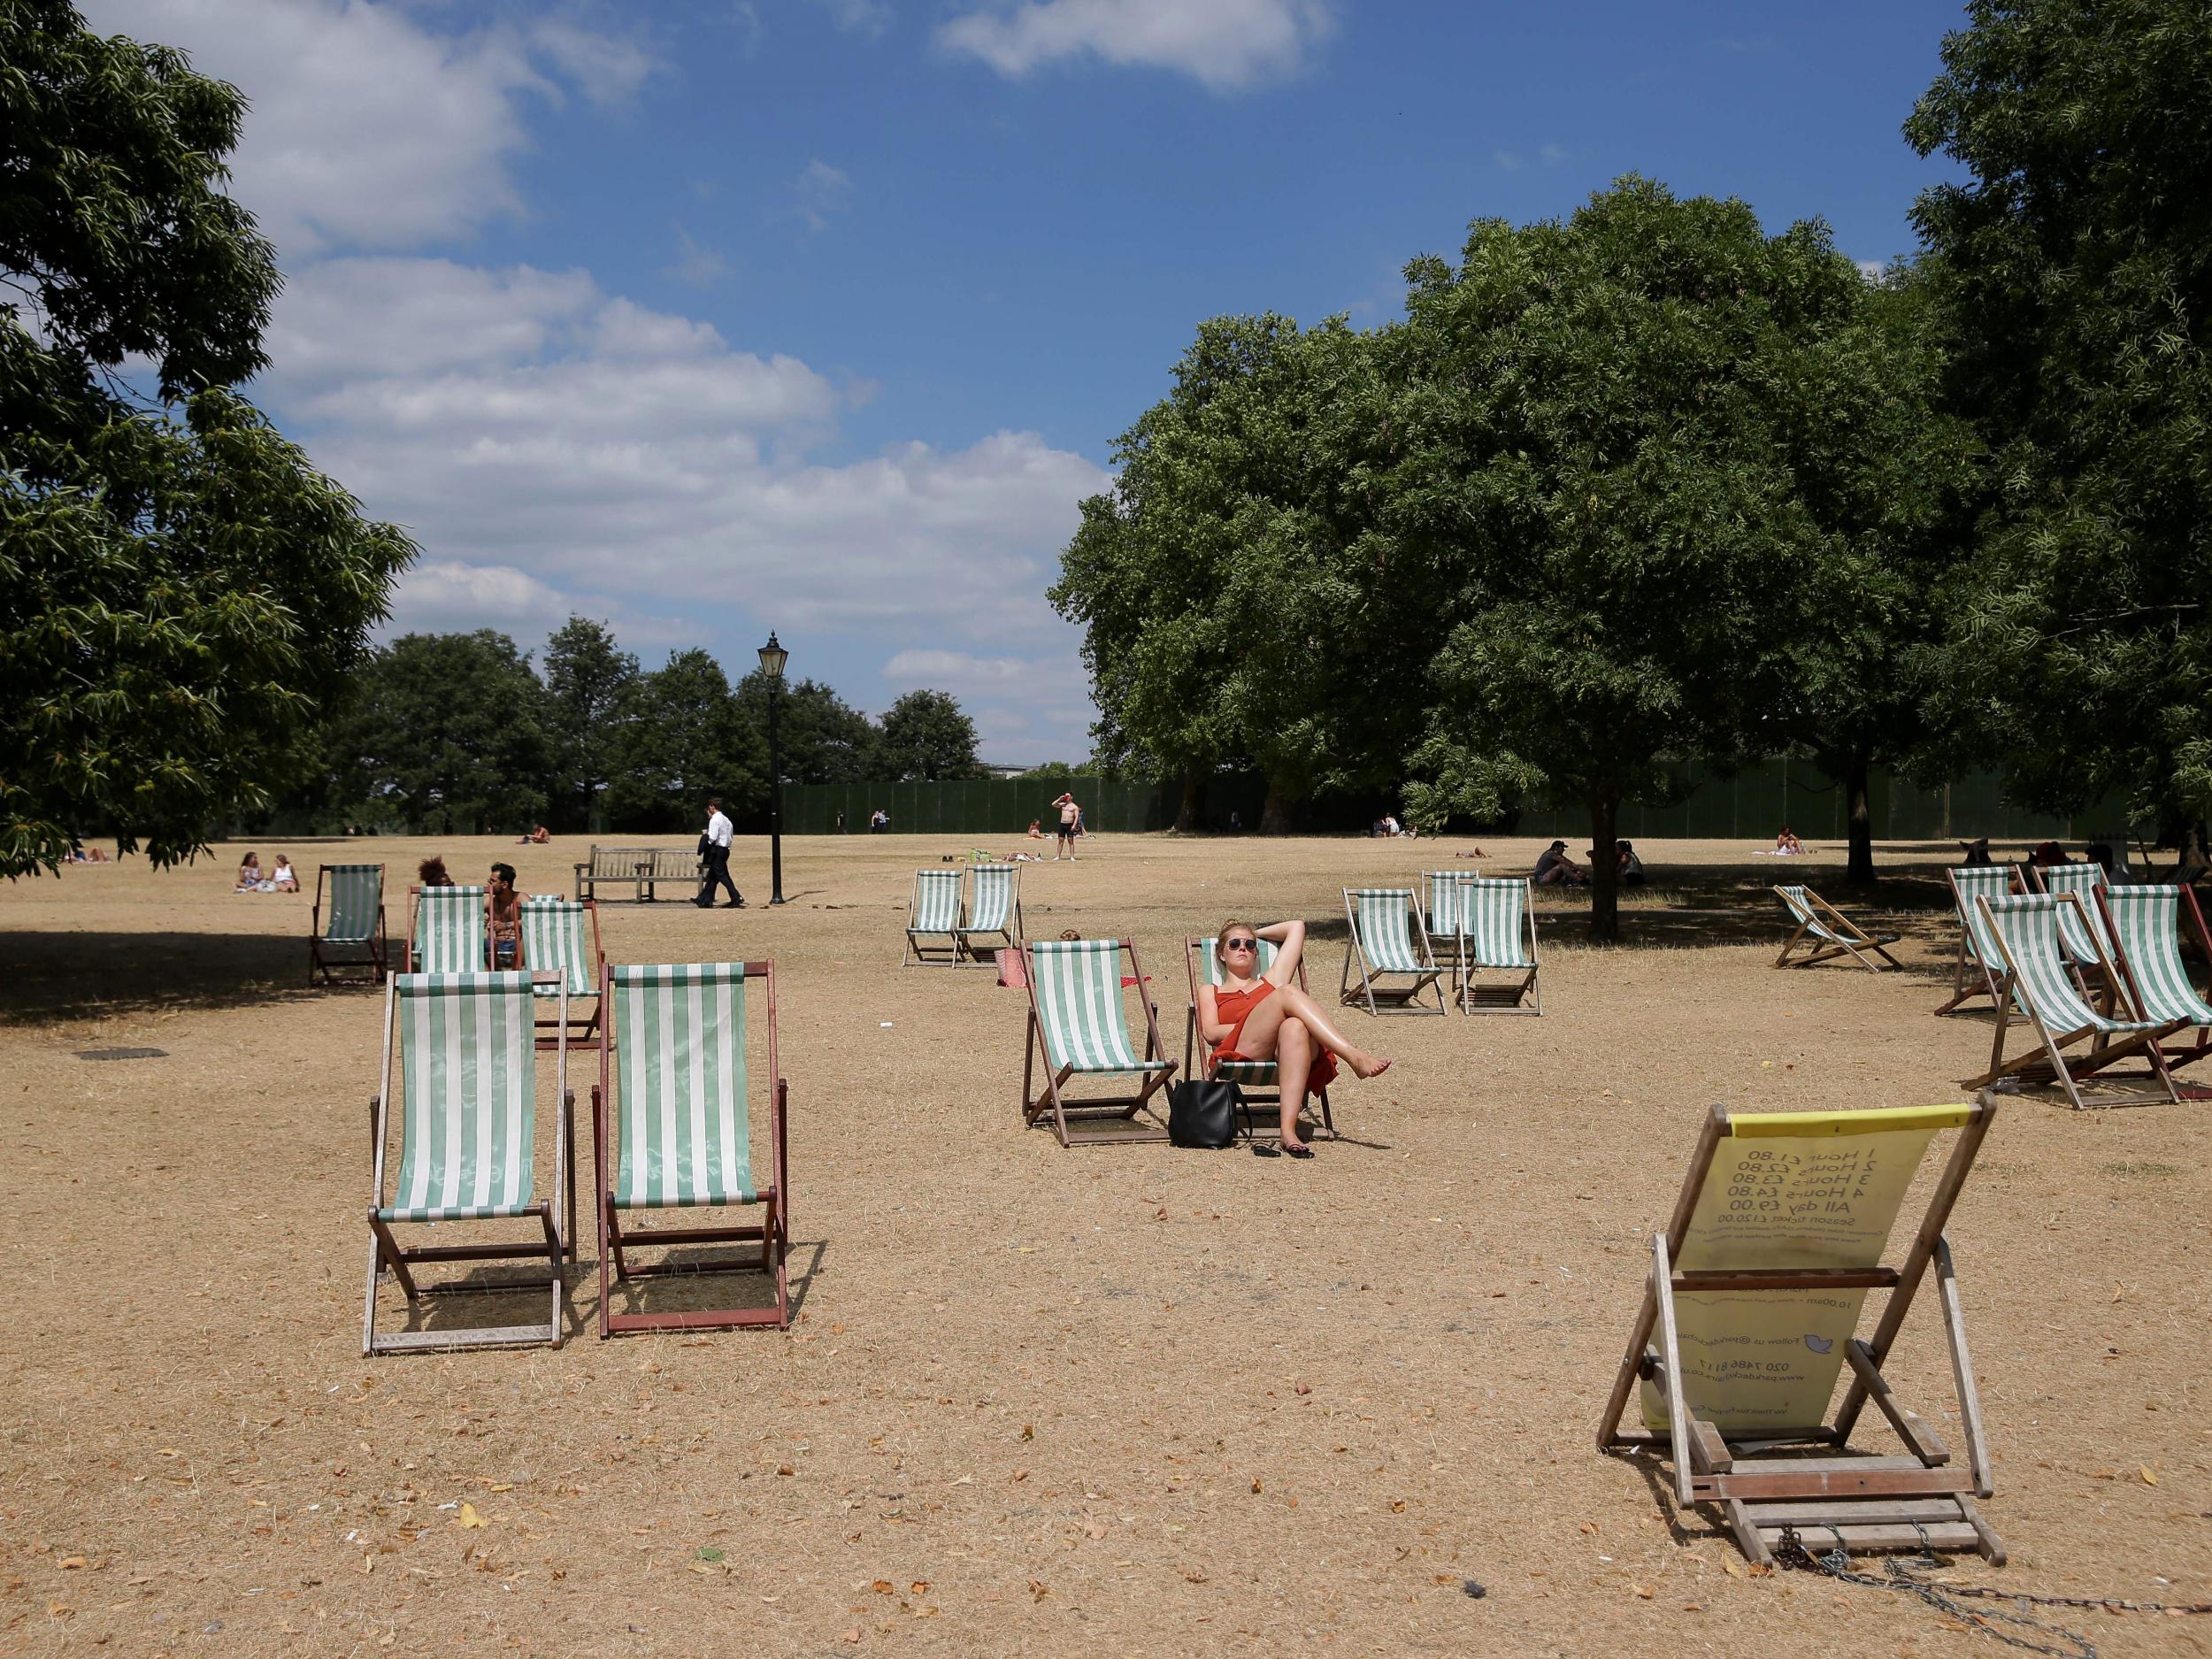 Heatwaves cause surges in mortality in vulnerable groups like elderly people and small children, and particularly those with heart and lung conditions